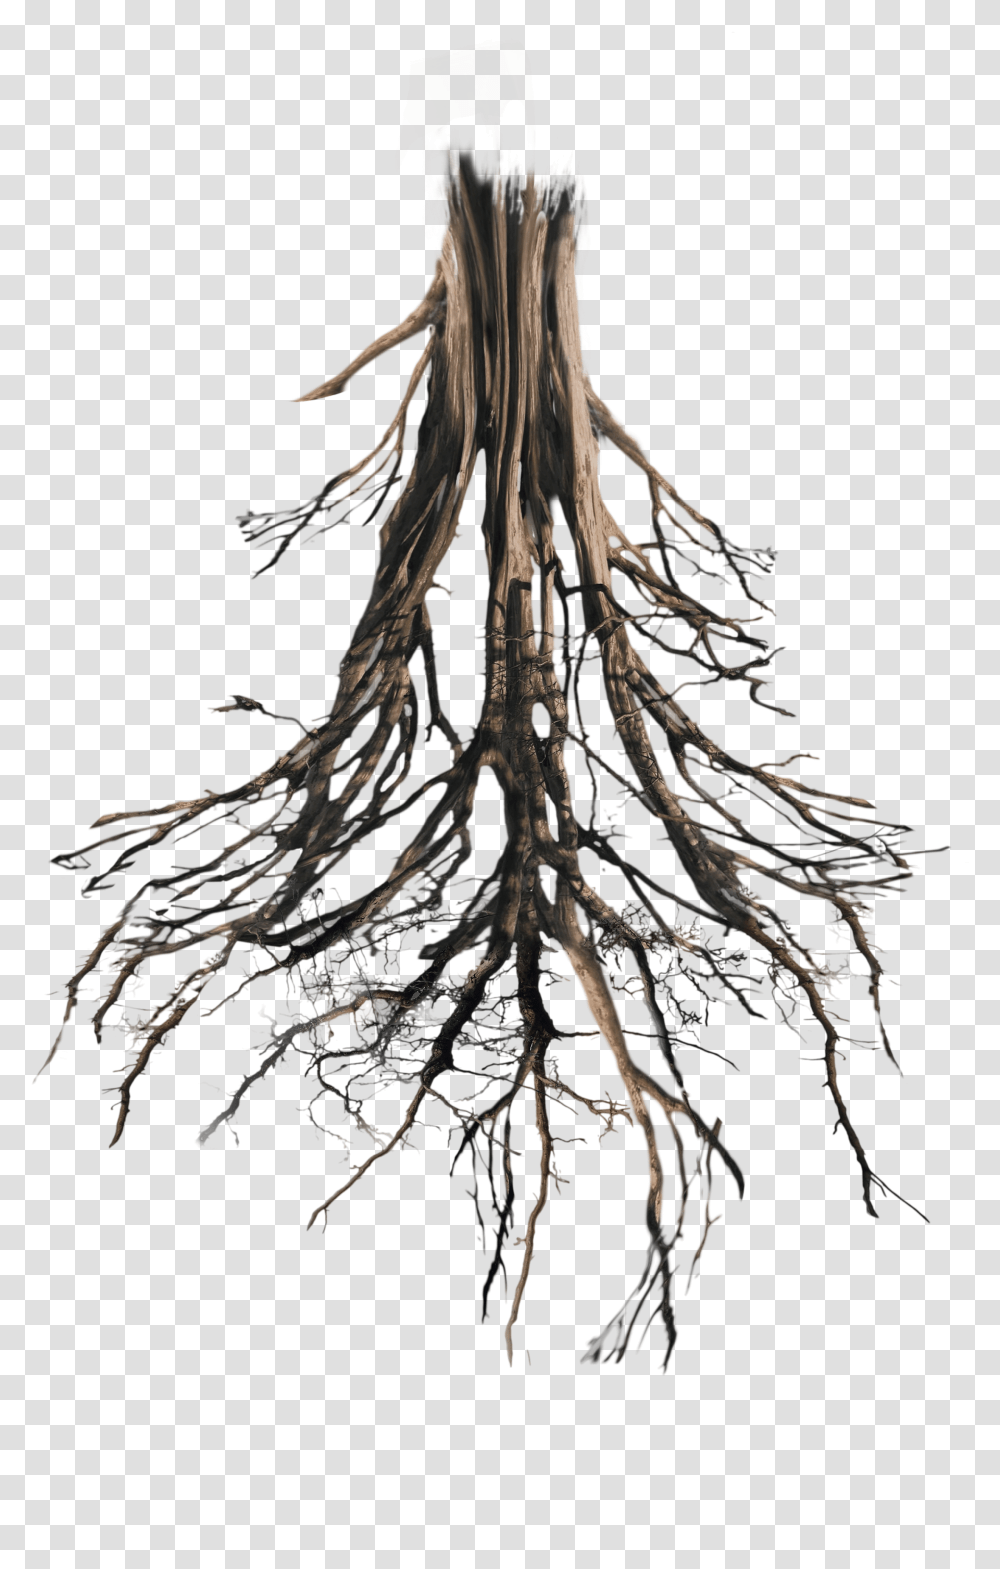 Floating Island Tree Trunk Rework Tree Trunk And Roots, Plant Transparent Png